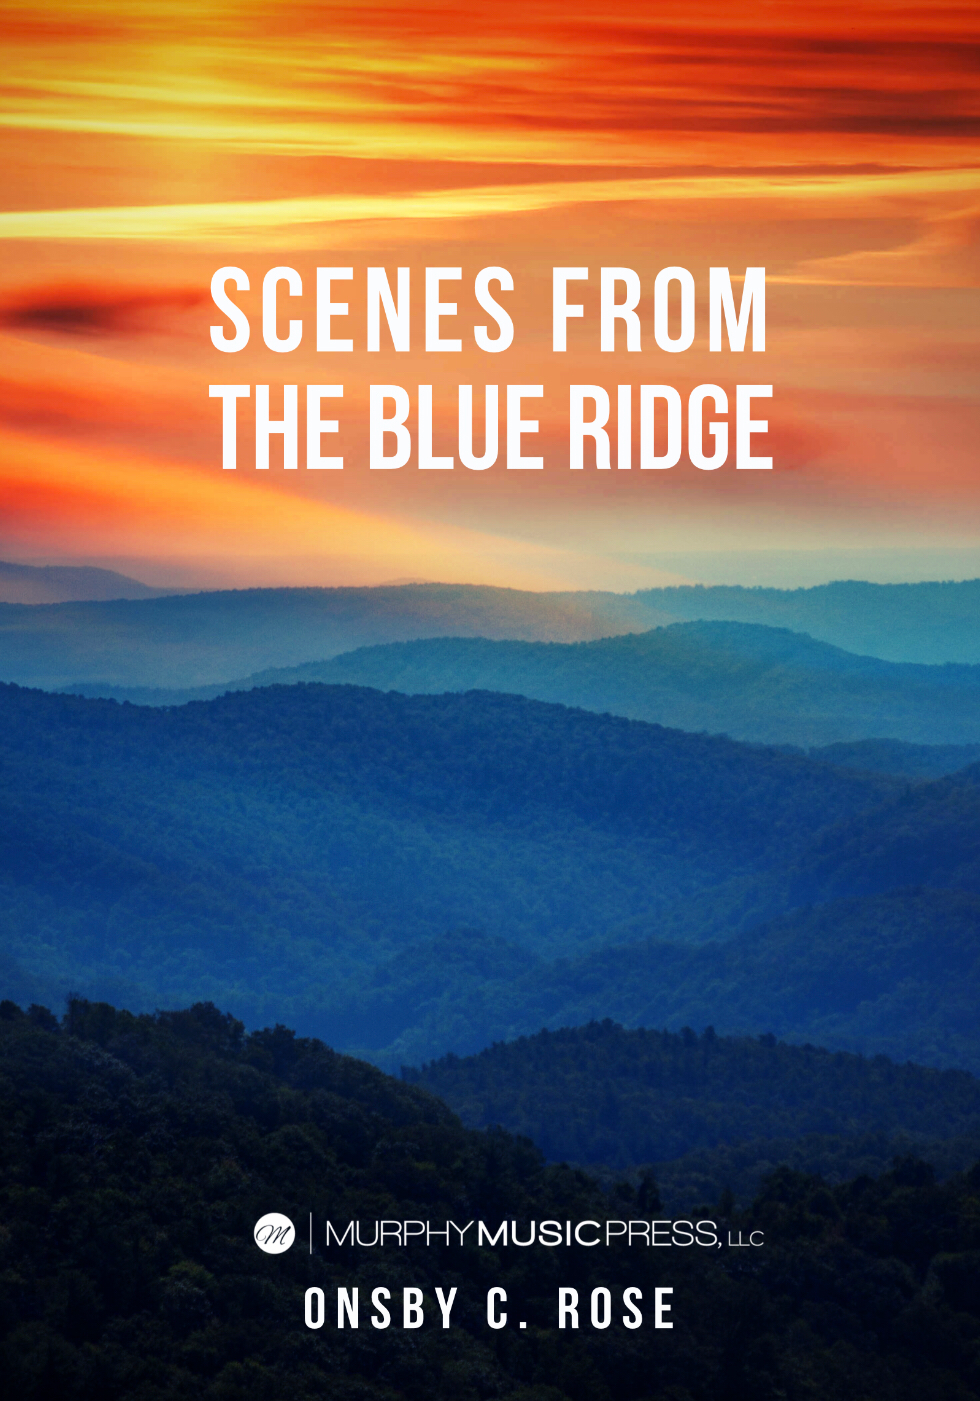 Scenes From The Blue Ridge (Score Only) by Onsby C. Rose